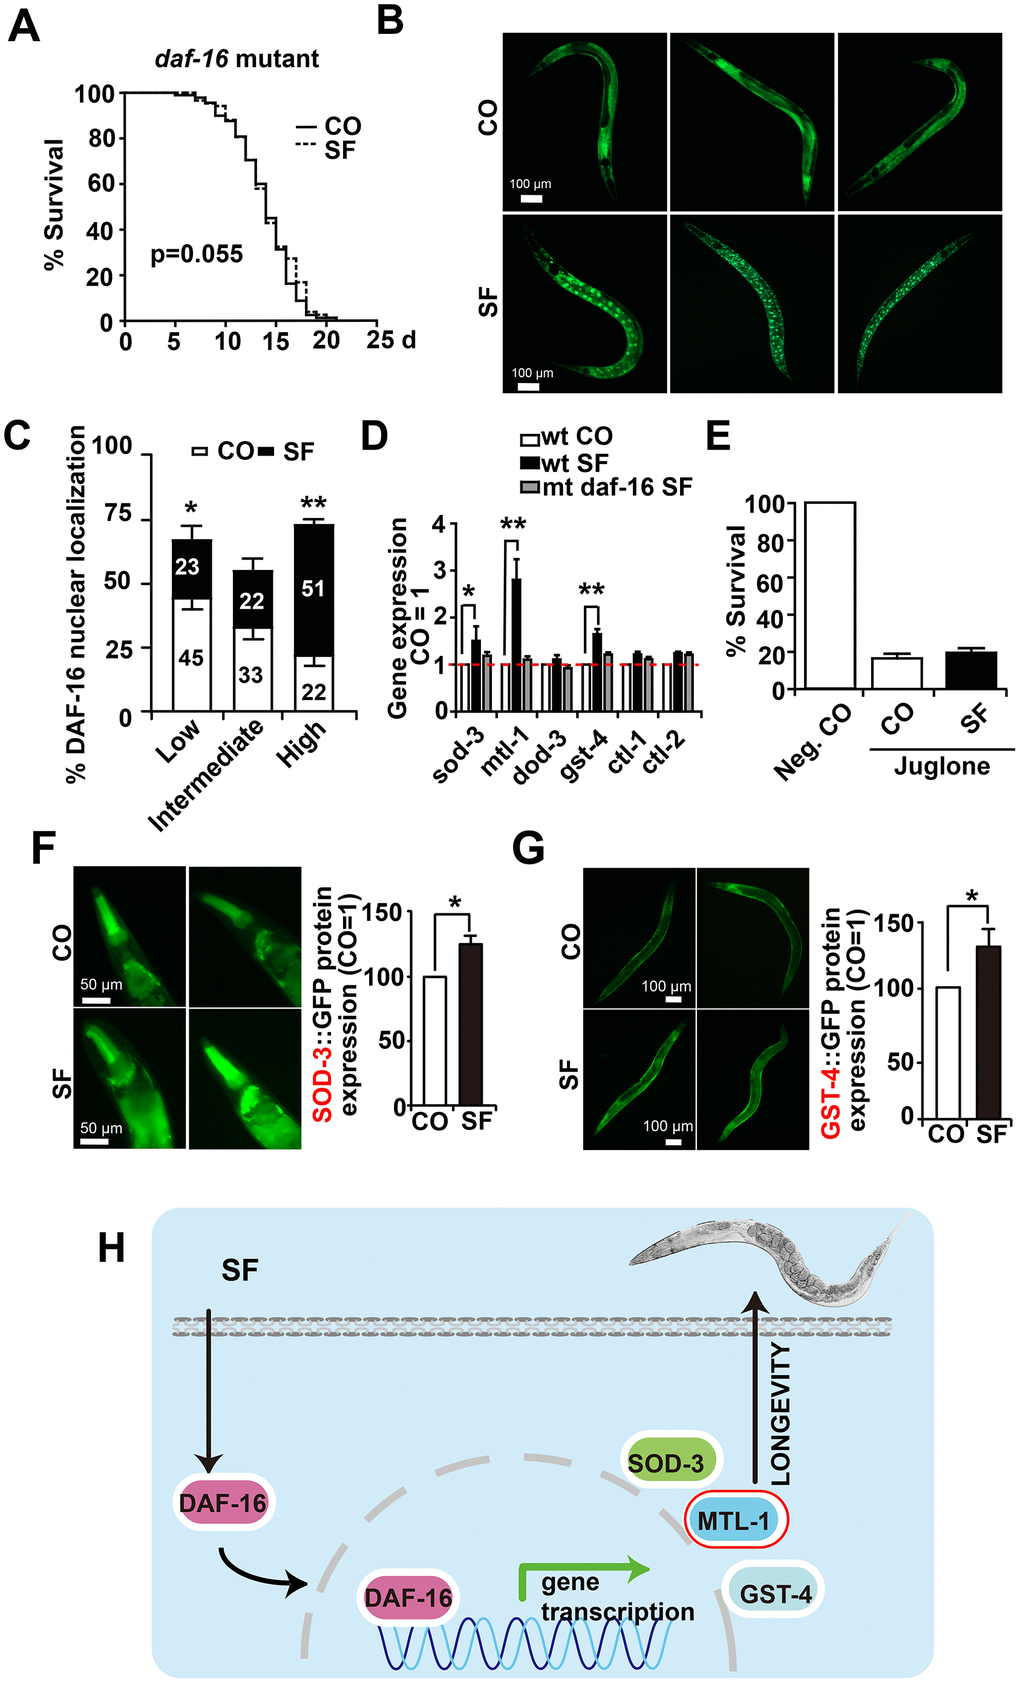 DAF-16 mediates sulforaphane-induced longevity and stress resistance. (A) Approximately 100 L4 larvae from the C. elegans CF1038 daf-16(mu86)I strain, carrying a mutant daf-16 gene (daf-16 mutant), were fed in the presence or absence (CO) of 100 μM sulforaphane (SF), and a Kaplan-Meier survival curve was generated as described in Figure. 1 and Materials and Methods. P=0.055, according to a log-rank test. (B) Adult TJ356 worms with a daf-16-GFP fusion gene were treated with sulforaphane for 3 days (SF) or were left untreated (CO), followed by the detection of green fluorescence in 20 worms per group by fluorescence microscopy. The bright green fluorescent dots indicate the nuclear localization of DAF-16. The scale bar indicates 100 μm. (C) The number of spots was counted and is represented in the diagram. The following scoring of the fluorescence intensity was applied: low (number of green fluorescent spots 50%). (D) Approximately 200 synchronized C. elegans L4 wild-type larvae received a regular diet (wt CO) or were fed in the presence of sulforaphane (wt SF). Additionally, L4 larvae of the daf-16(mu86)I strain, carrying a daf-16 mutation (mt daf-16), were fed in the presence of sulforaphane (mt daf-16 SF). Three days later, living worms were selected, and total RNA was extracted. A qRT-PCR assay with specific C. elegans primers (Table 3) was performed to detect the expression of the DAF-16-target genes sod-3, mtl-1, dod-3, gst-4, ctl-1, and ctl-2. The expression levels in untreated control worms were set as 1. (E) Approximately 100 synchronized L4 larvae of the daf-16(mu86)I C. elegans strain were fed OP50 bacteria in the absence (Neg. CO) or presence of sulforaphane (SF), in the presence or absence of a 120 μM concentration of the oxidative chemical juglone, as indicated. Fourteen days later, the surviving worms of each group were selected and counted. (F) L4 CF1553 worms with a SOD-3::GFP fusion gene were fed with sulforaphane for 3 days (SF) or were left untreated (CO), followed by the detection of green fluorescence in 20 worms per group by fluorescence microscopy, indicating a high expression of SOD-3 in the head and foregut of C. elegans. The fluorescence intensity was analyzed by imageJ, and the fluorescence of the control was set to 1. Representative images at 100× magnification are shown on the left, and the scale bar indicates 50 μm. (G) L4 CL2166 worms with a GST-4::GFP fusion gene were treated and analyzed as described above. Representative images at 100× magnification are shown on the left, and the scale bar indicates 100 μm. *PH) Cartoon to demonstrate that sulforaphane mediates the nuclear translocation of the DAF-16 transcription factor, where it binds to the promoter regions of its target genes and thereby activates SOD-3, MTL-1 and GST-4, which mediate the stress resistance and longevity of C. elegans. **P